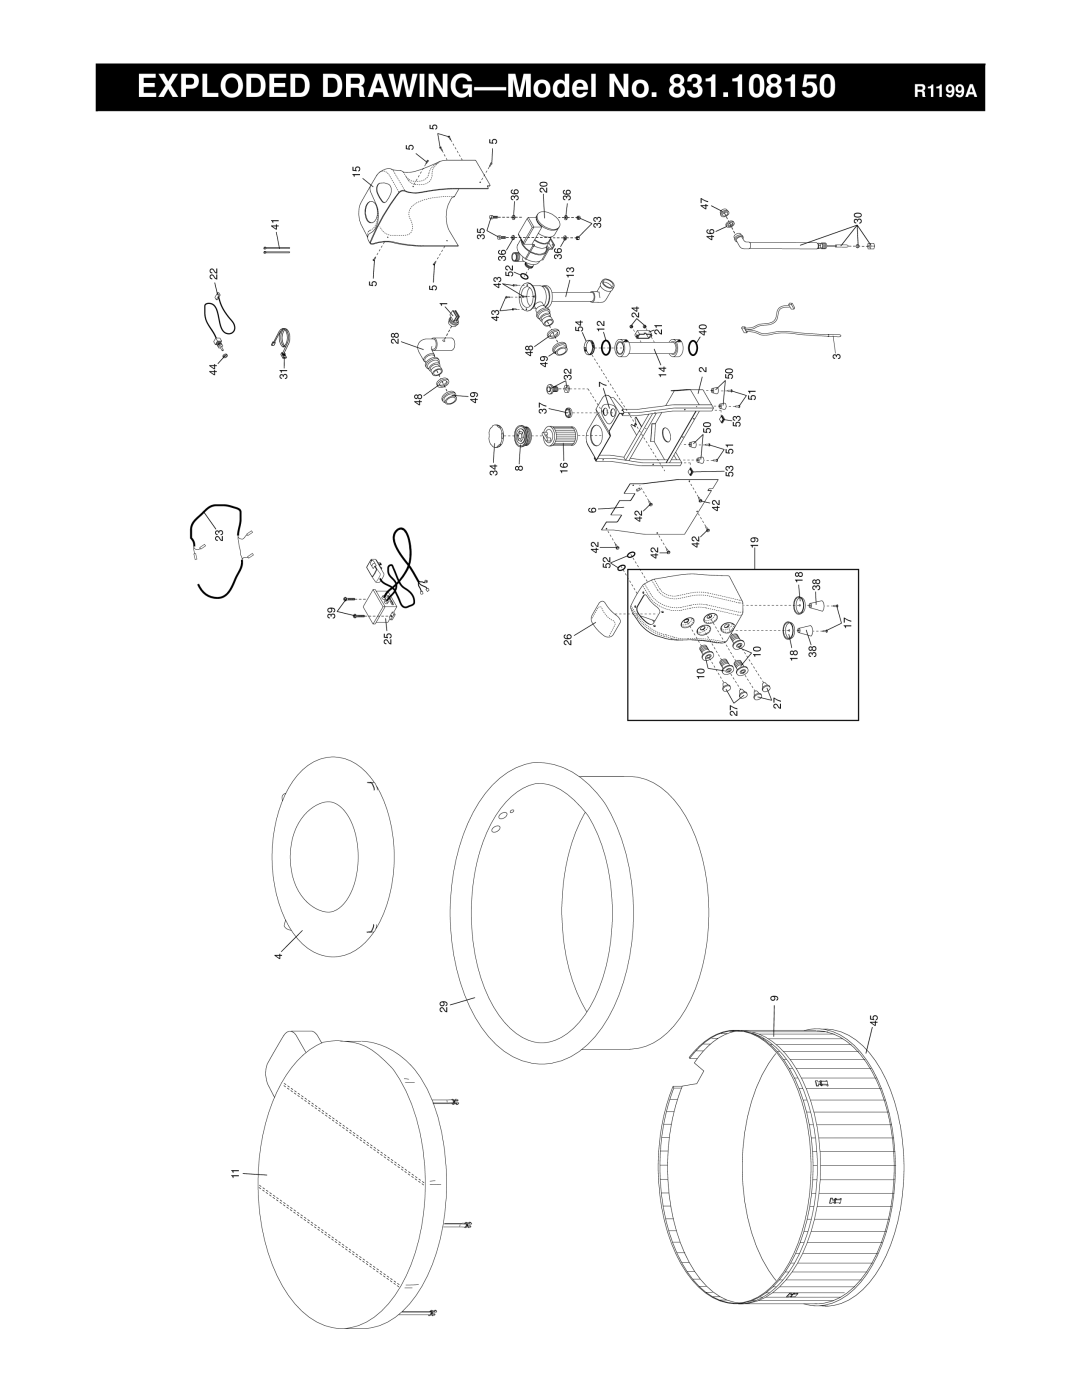 Image user manual 831.108150, DRAWING-Model, R1199A, Exploded 